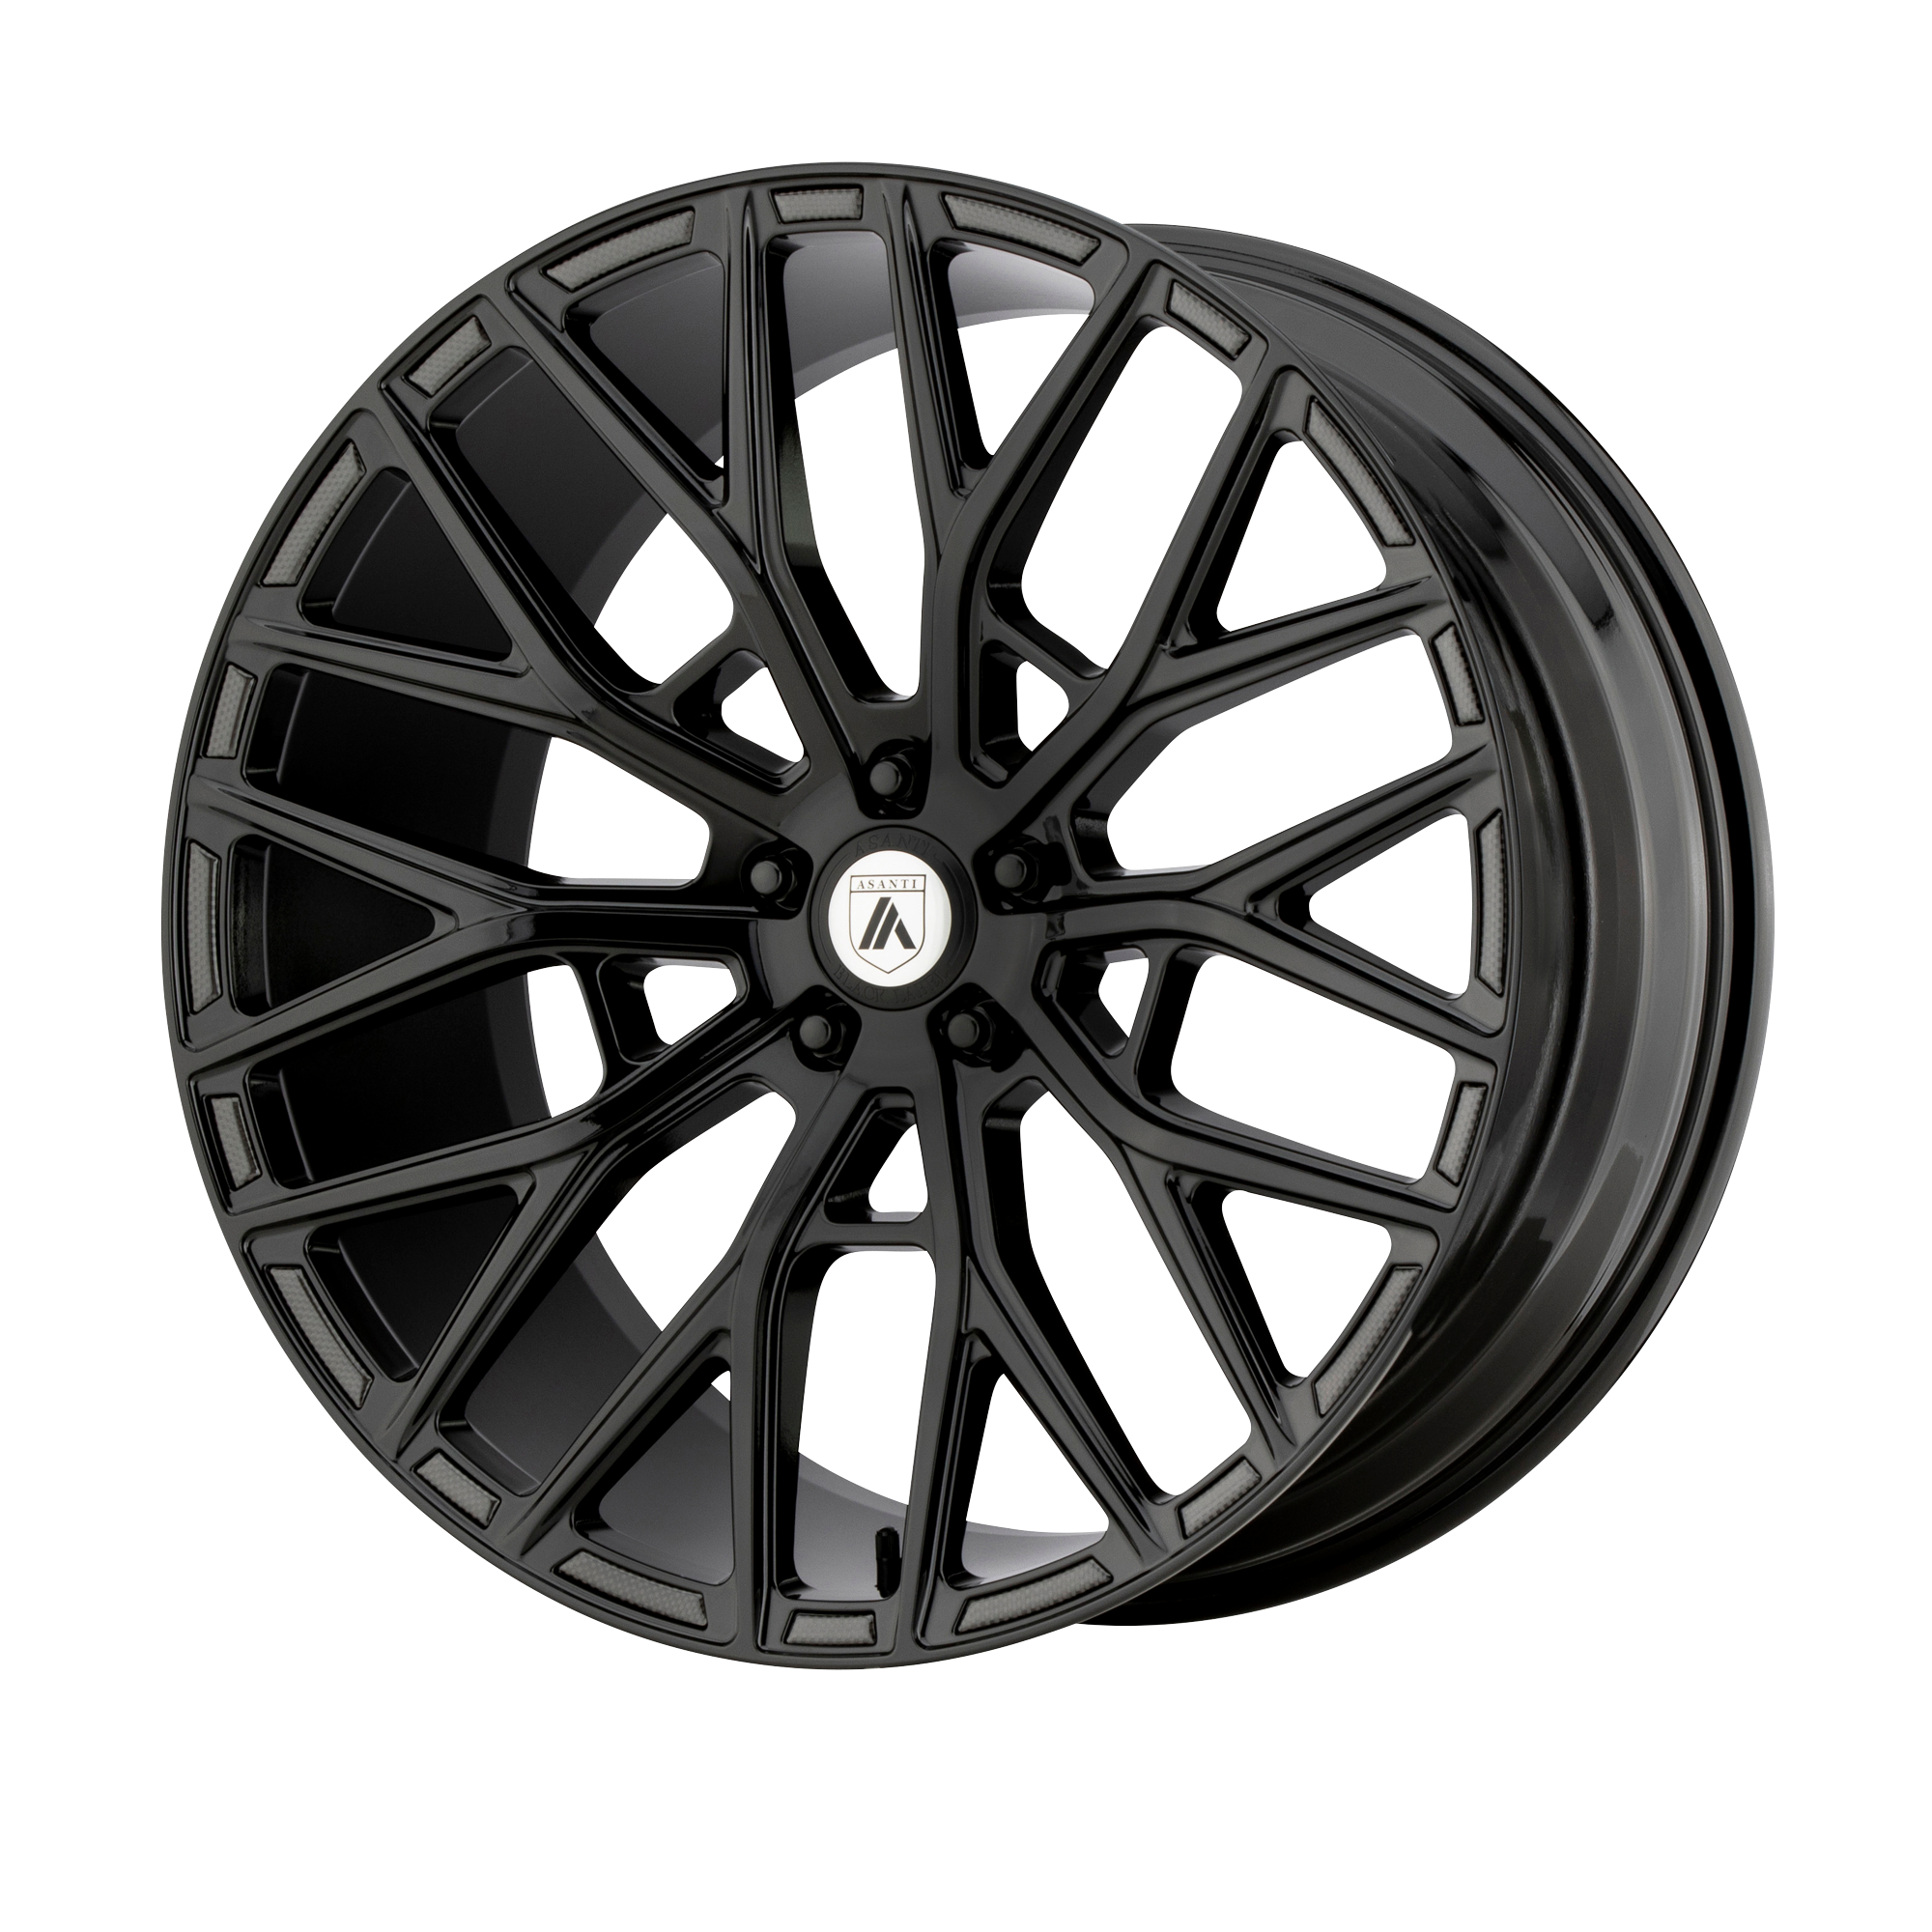 LEO 22x10.5 Blank GLOSS BLACK (25 mm) - Tires and Engine Performance